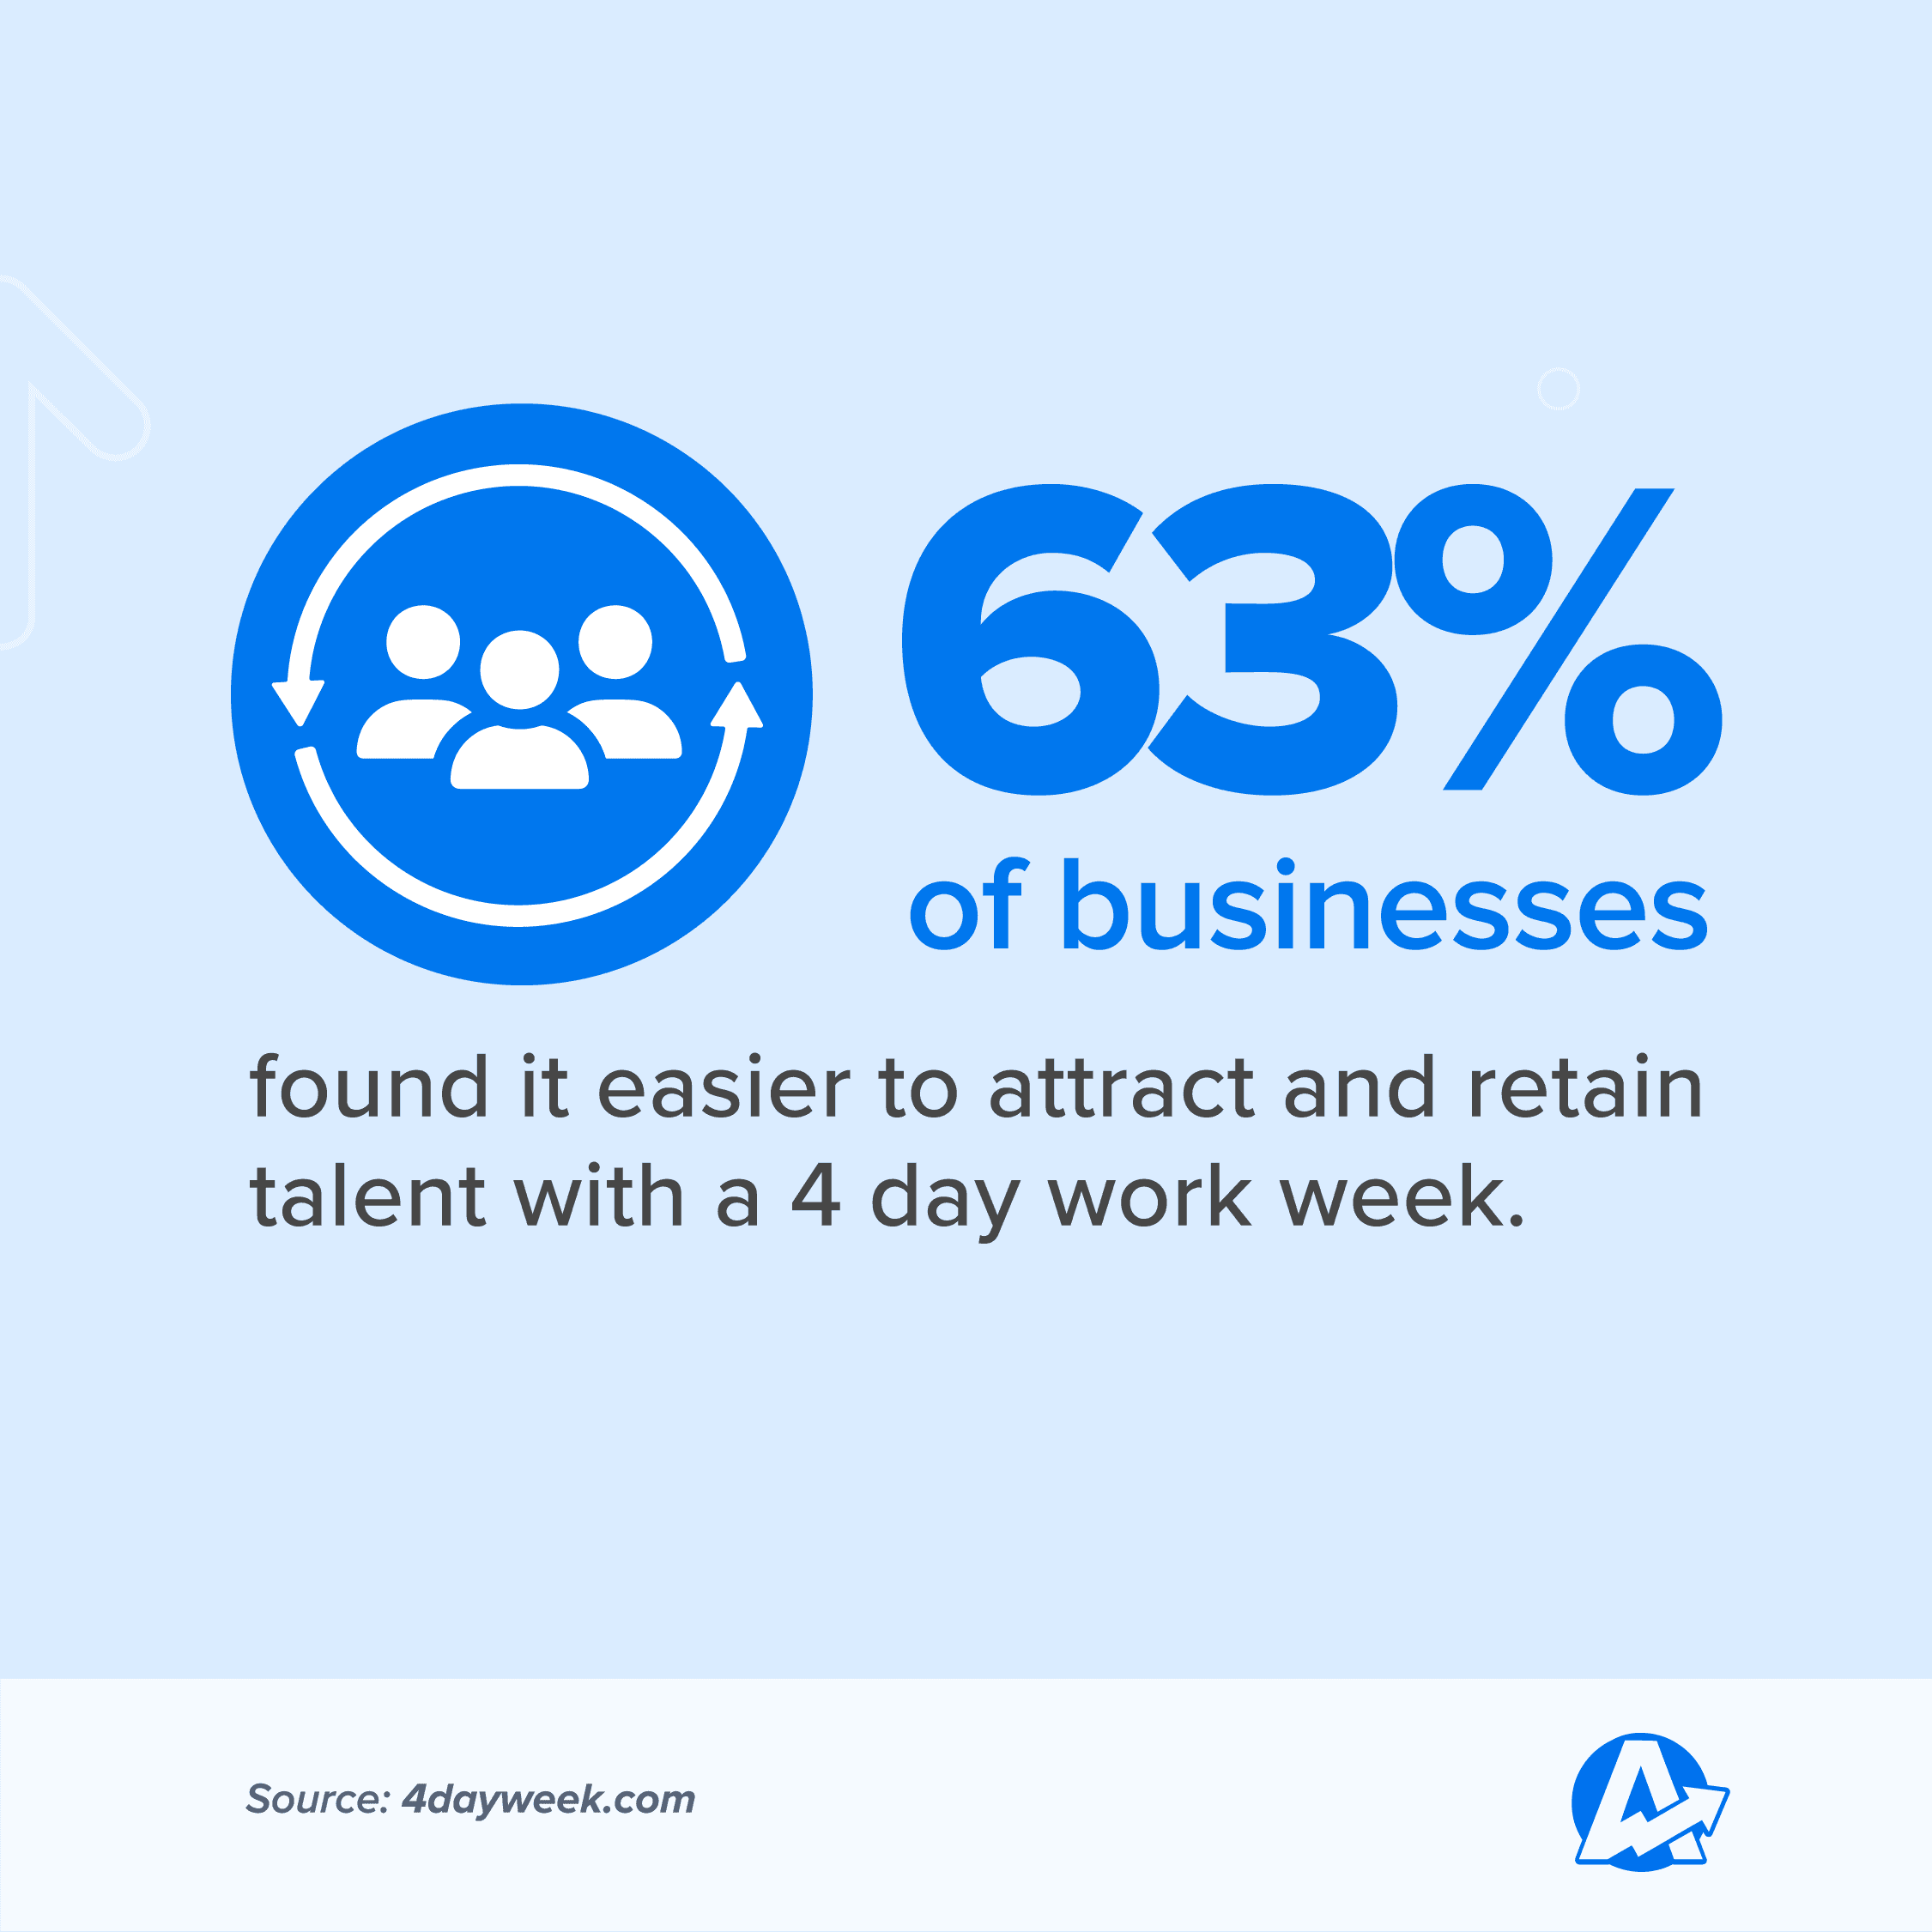 4 Day Workweek Impact on Talent Acquisition and Retention